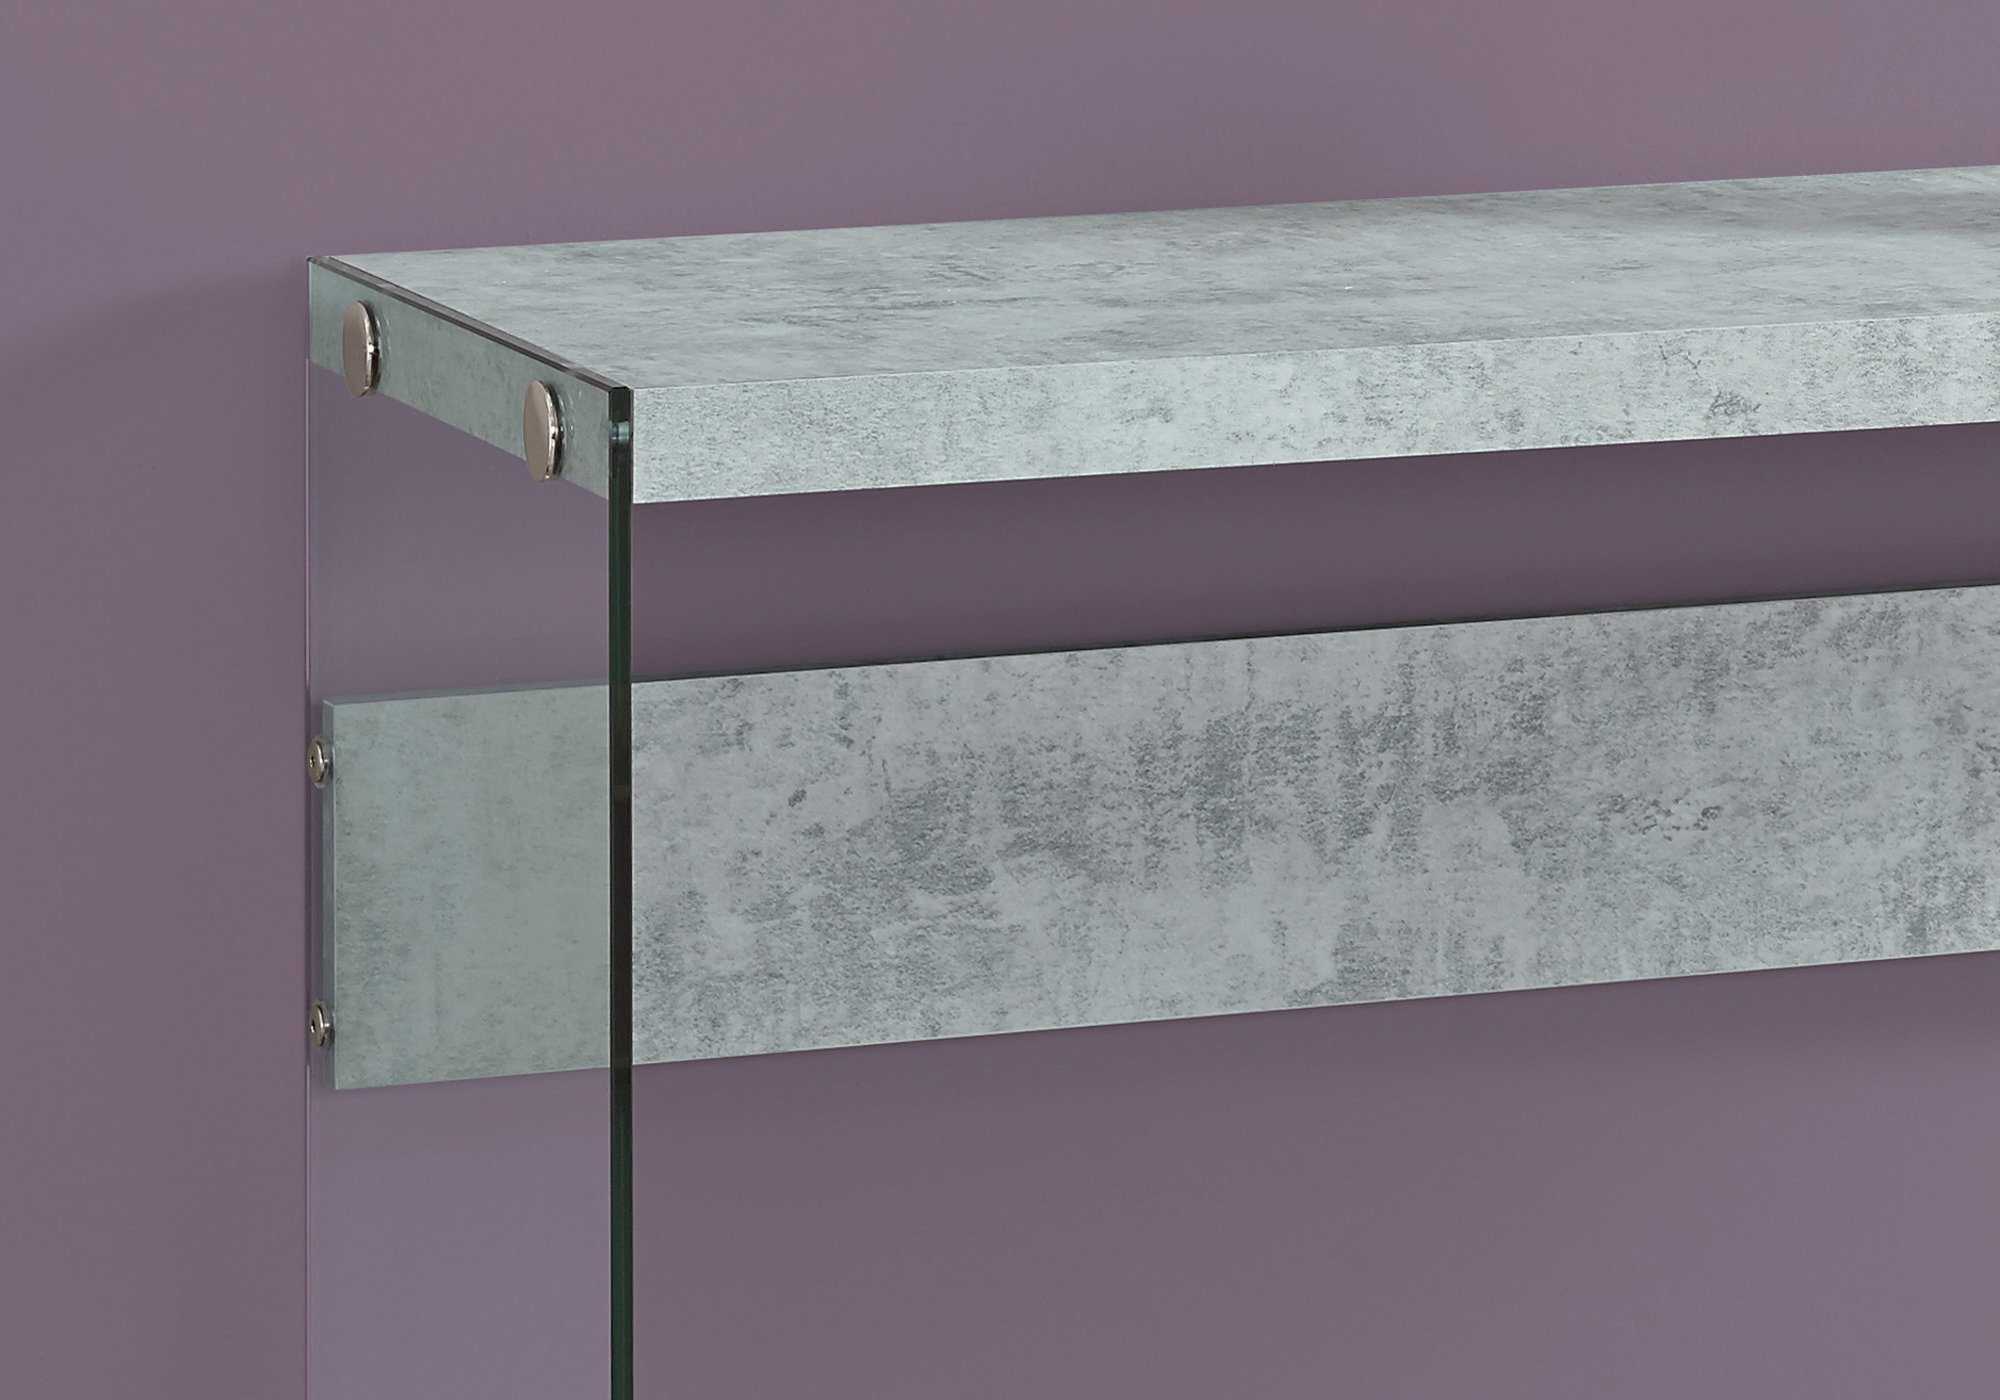 ACCENT TABLE - 44"L / GREY CEMENT / TEMPERED GLASS